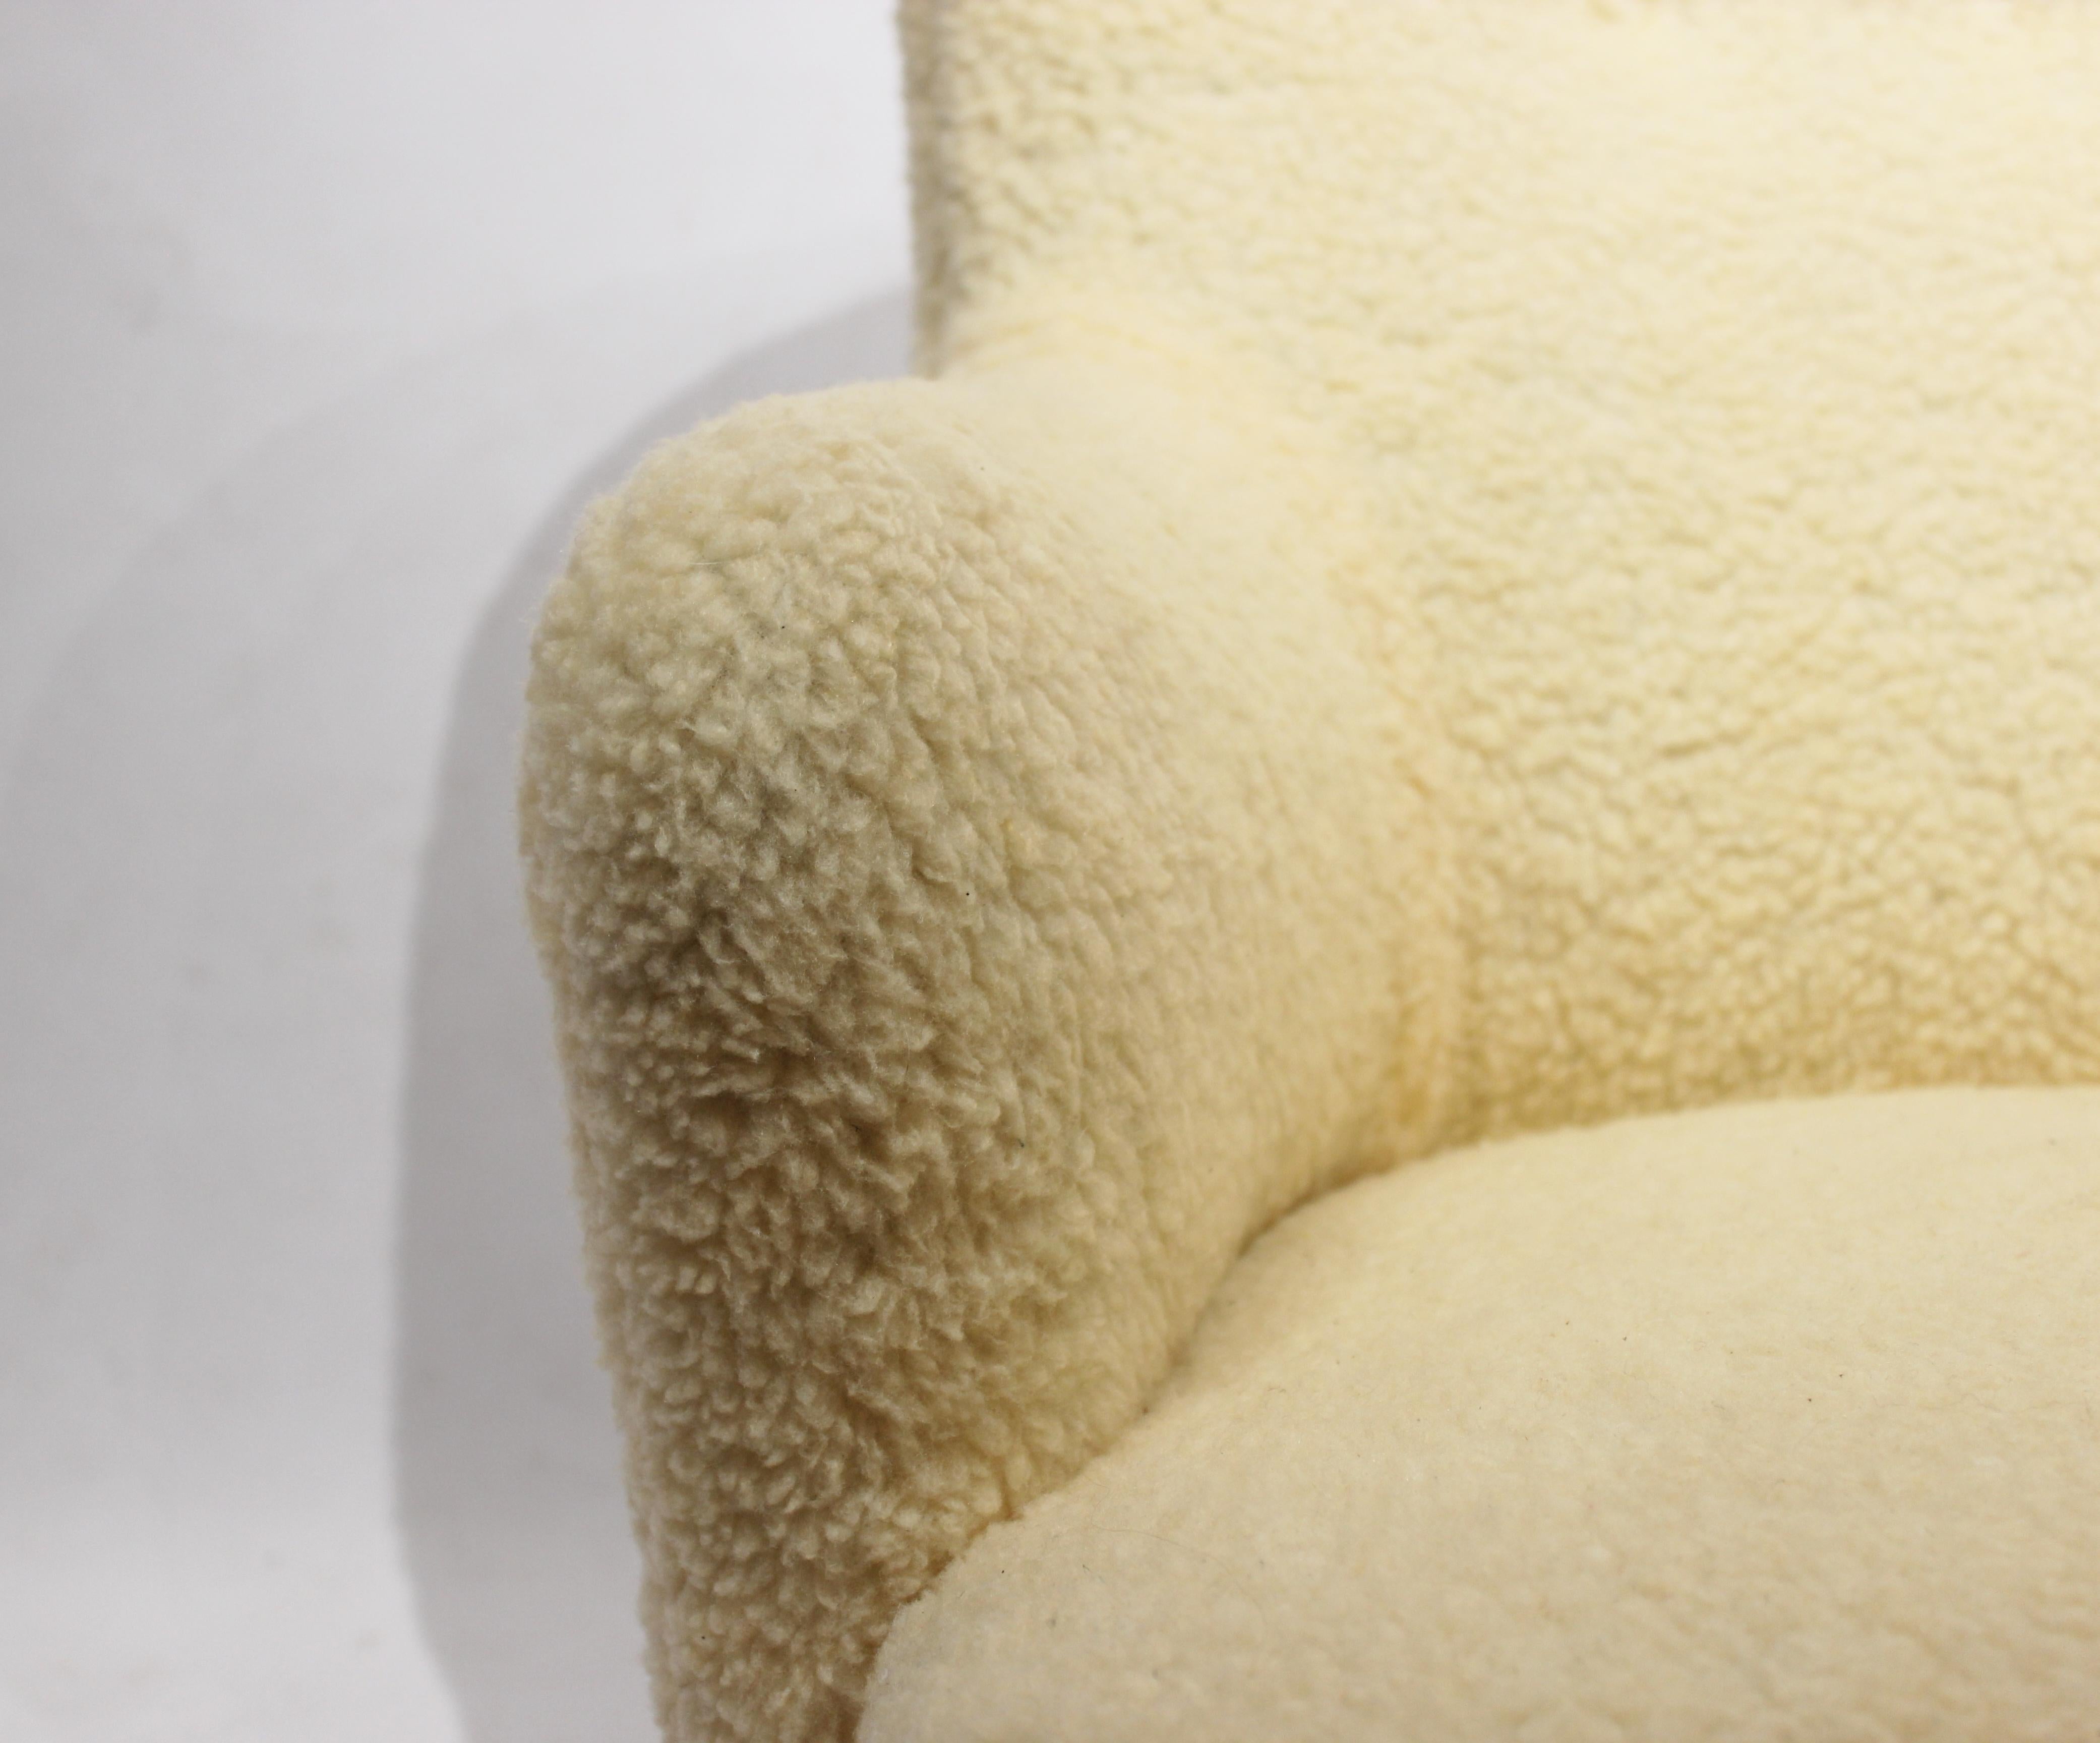 Other Easy Chair Upholstered with Sheep Wool and Legs of Mahogany from the 1940s